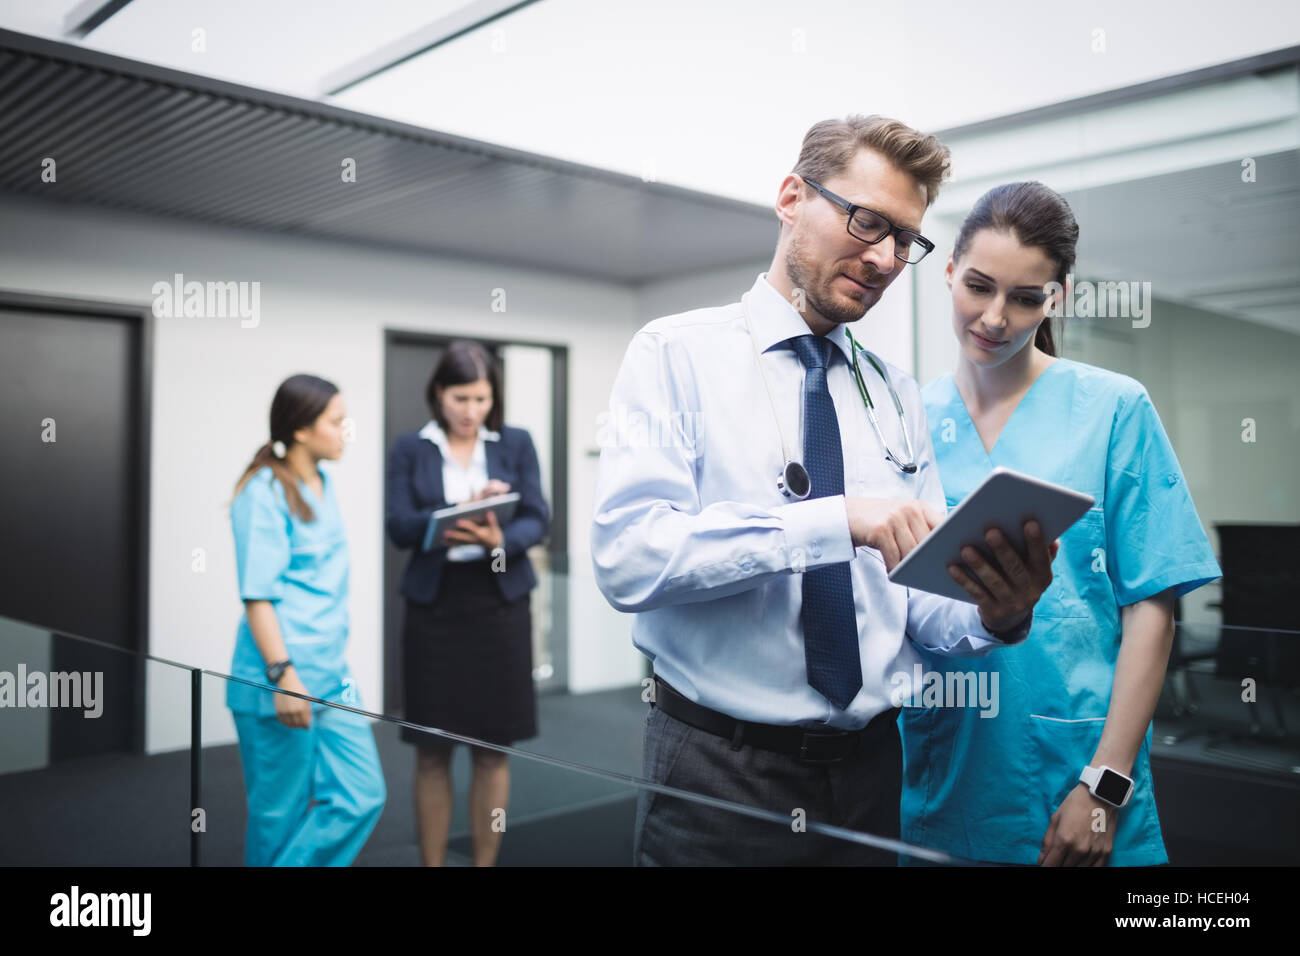 Doctor and nurse discussing over digital tablet Stock Photo